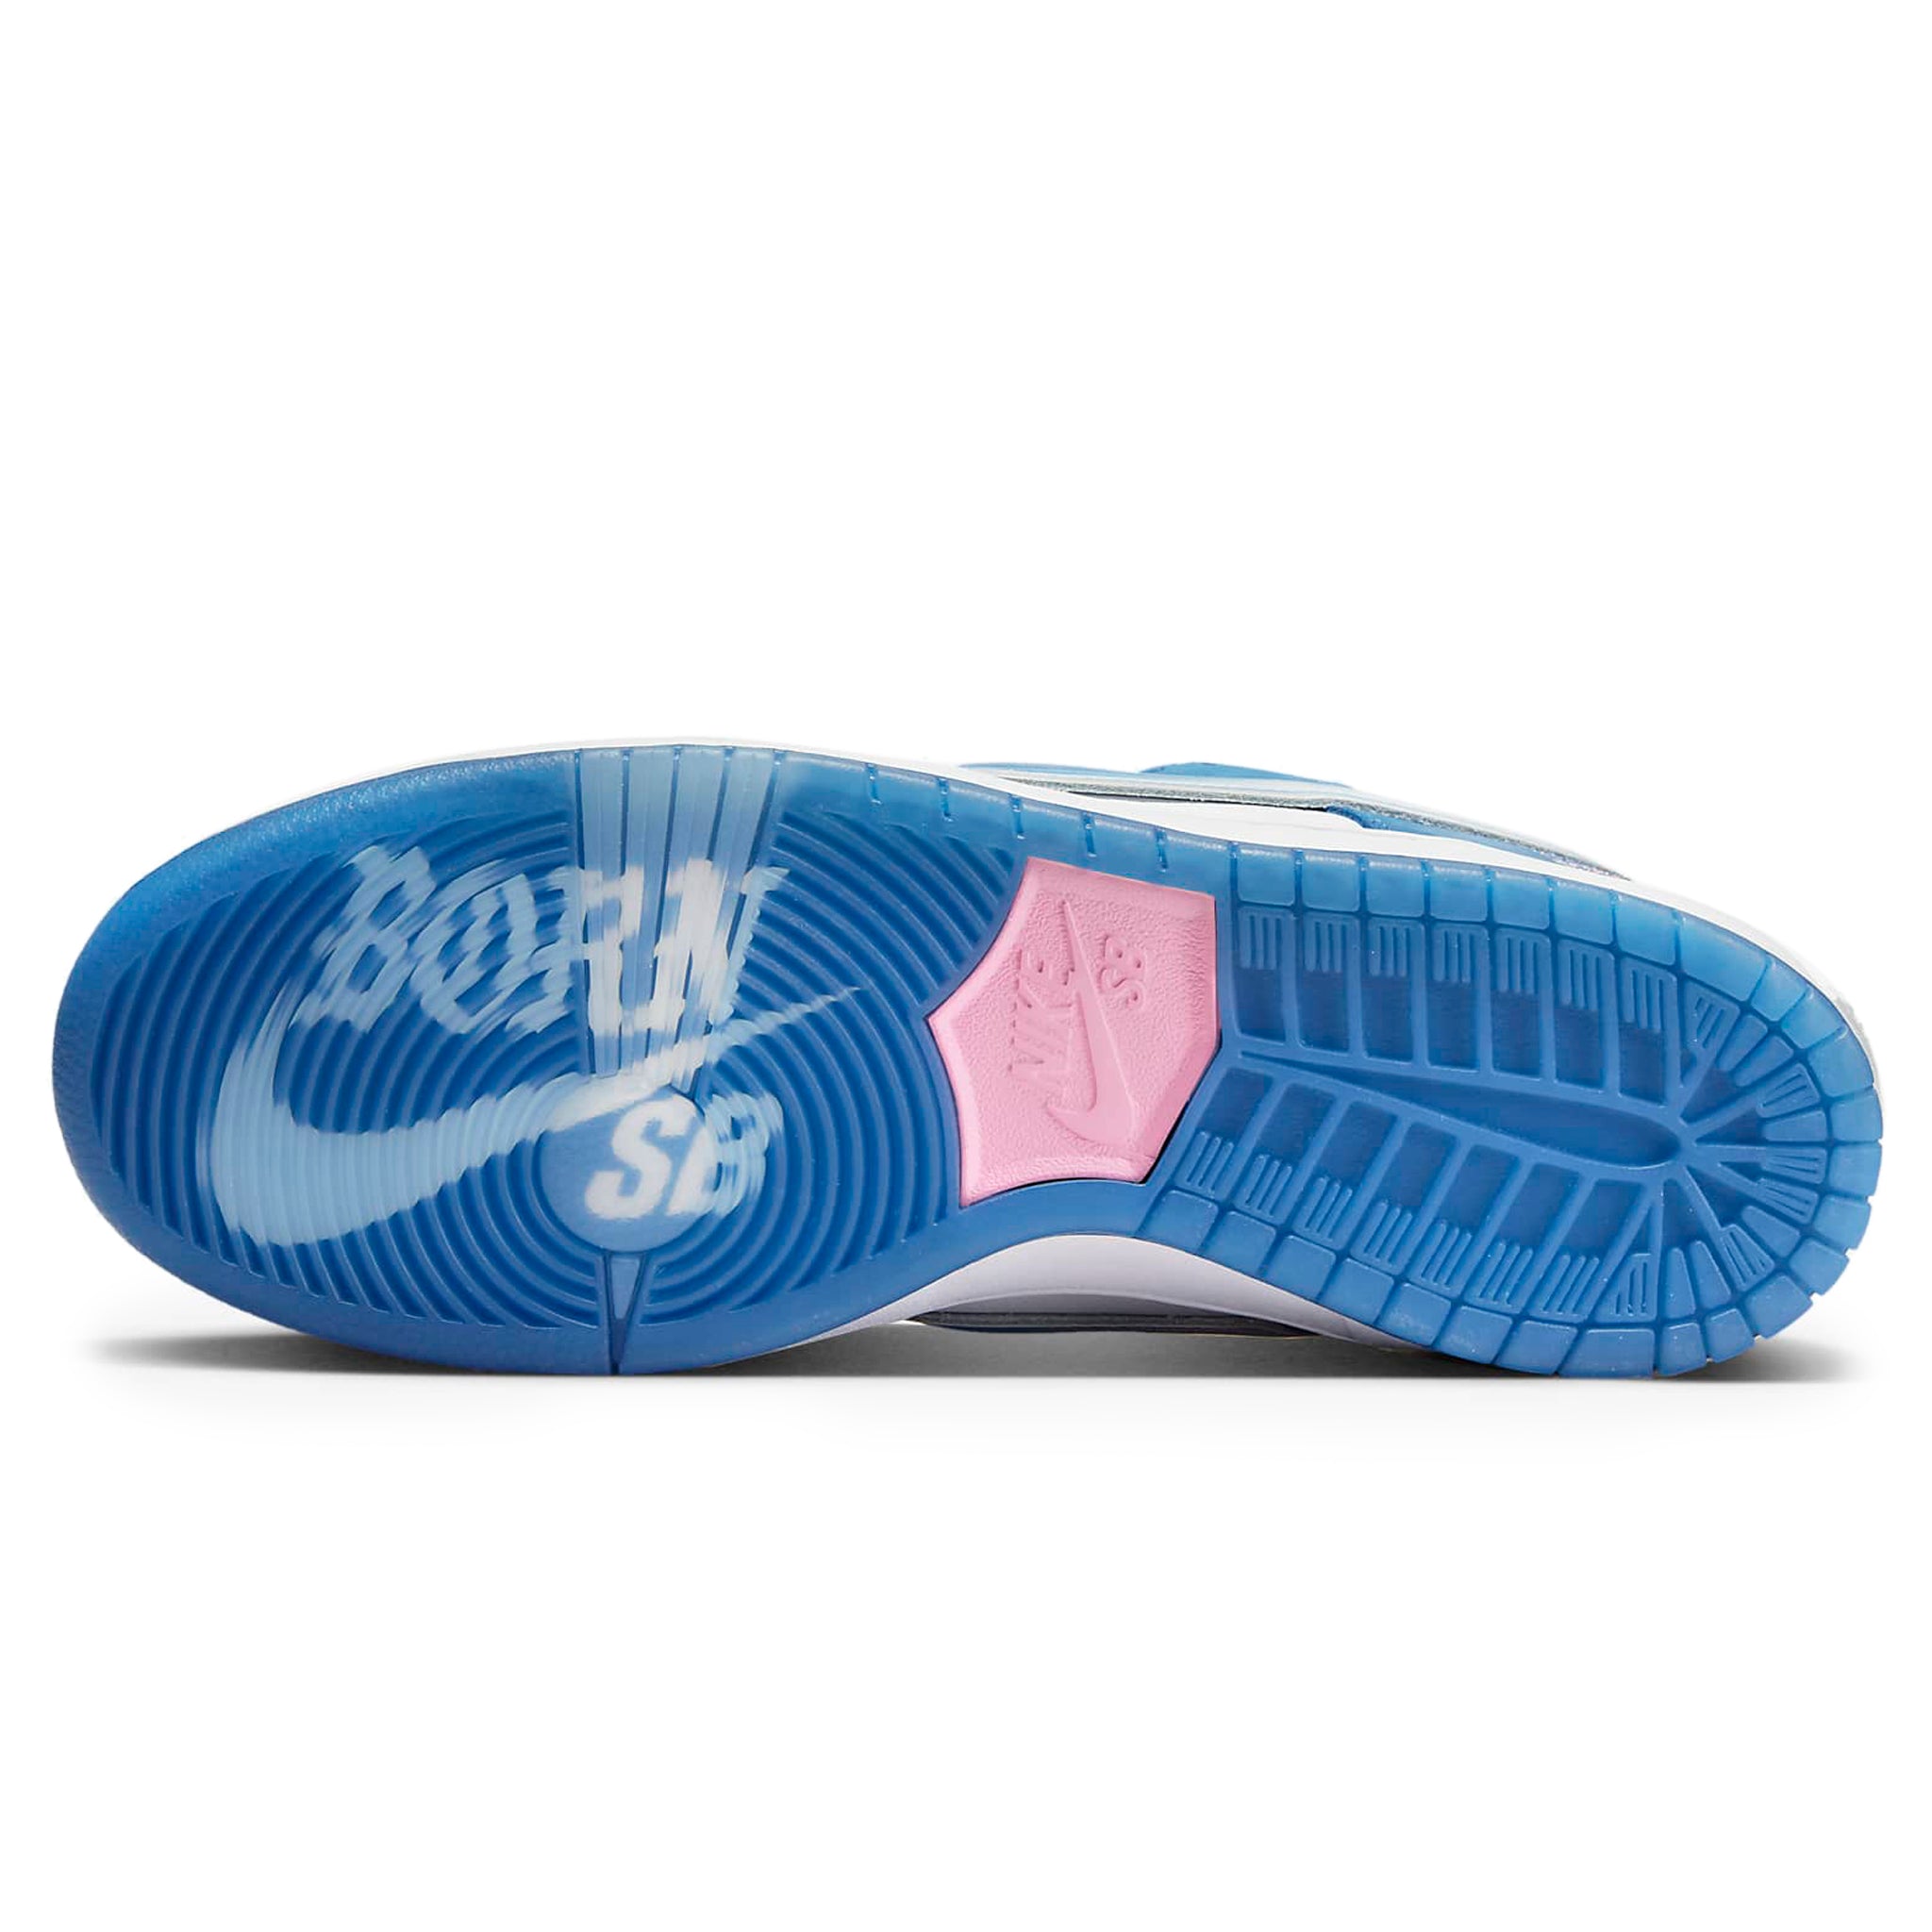 Sole view of Born x Raised x Nike SB Dunk Low One Block at a Time FN7819-400